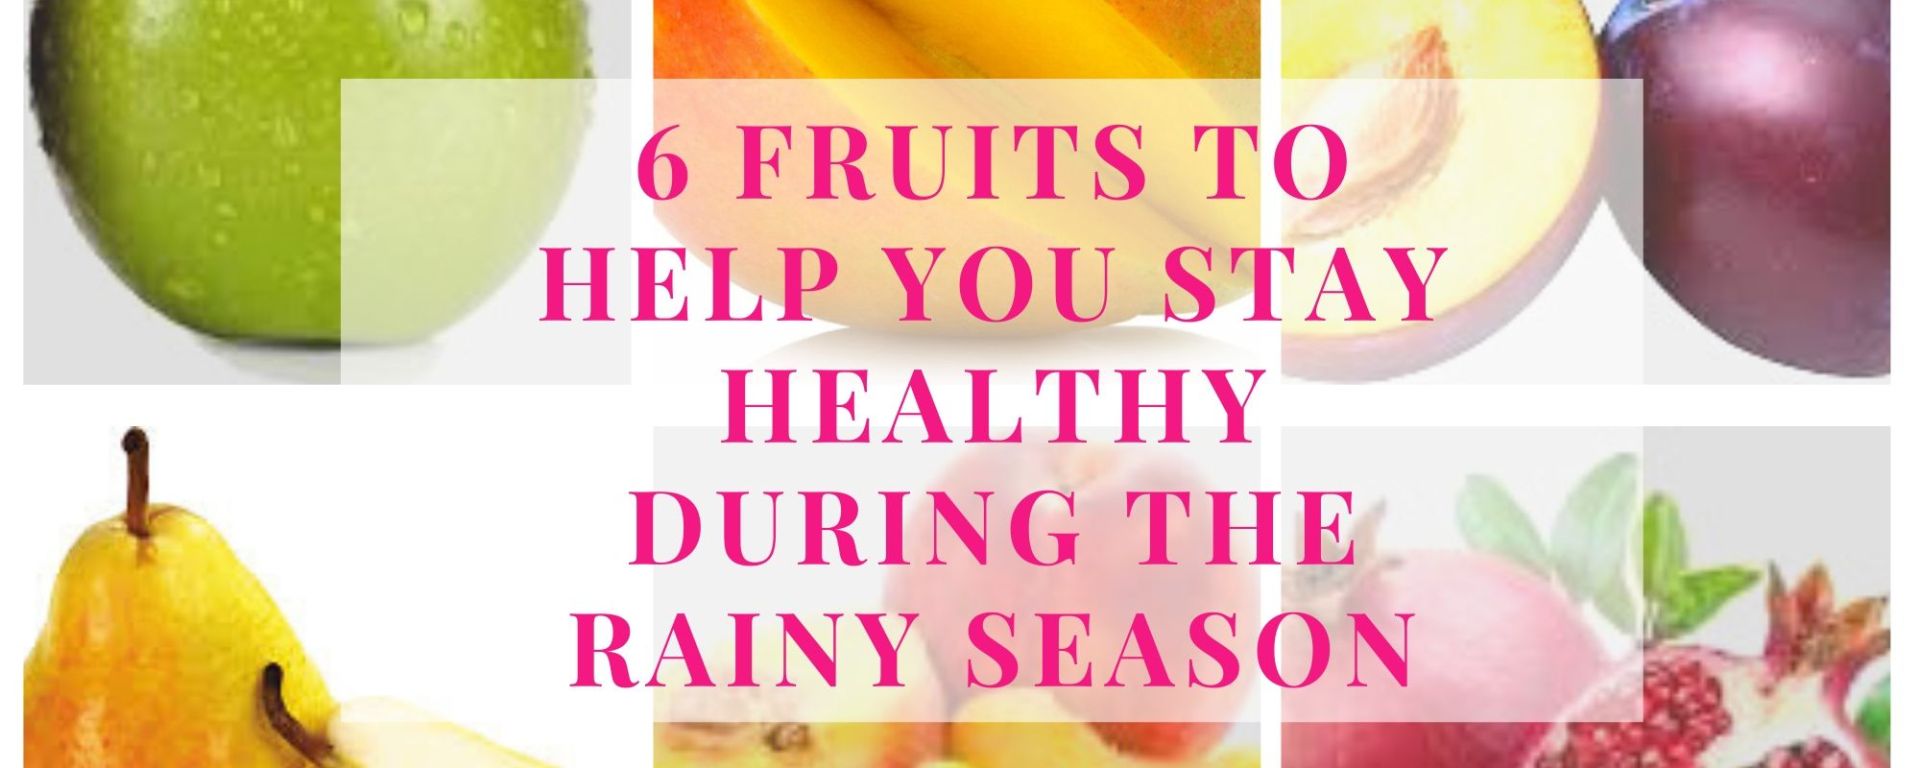 Fruits to Help You Stay Healthy During the Rainy Season